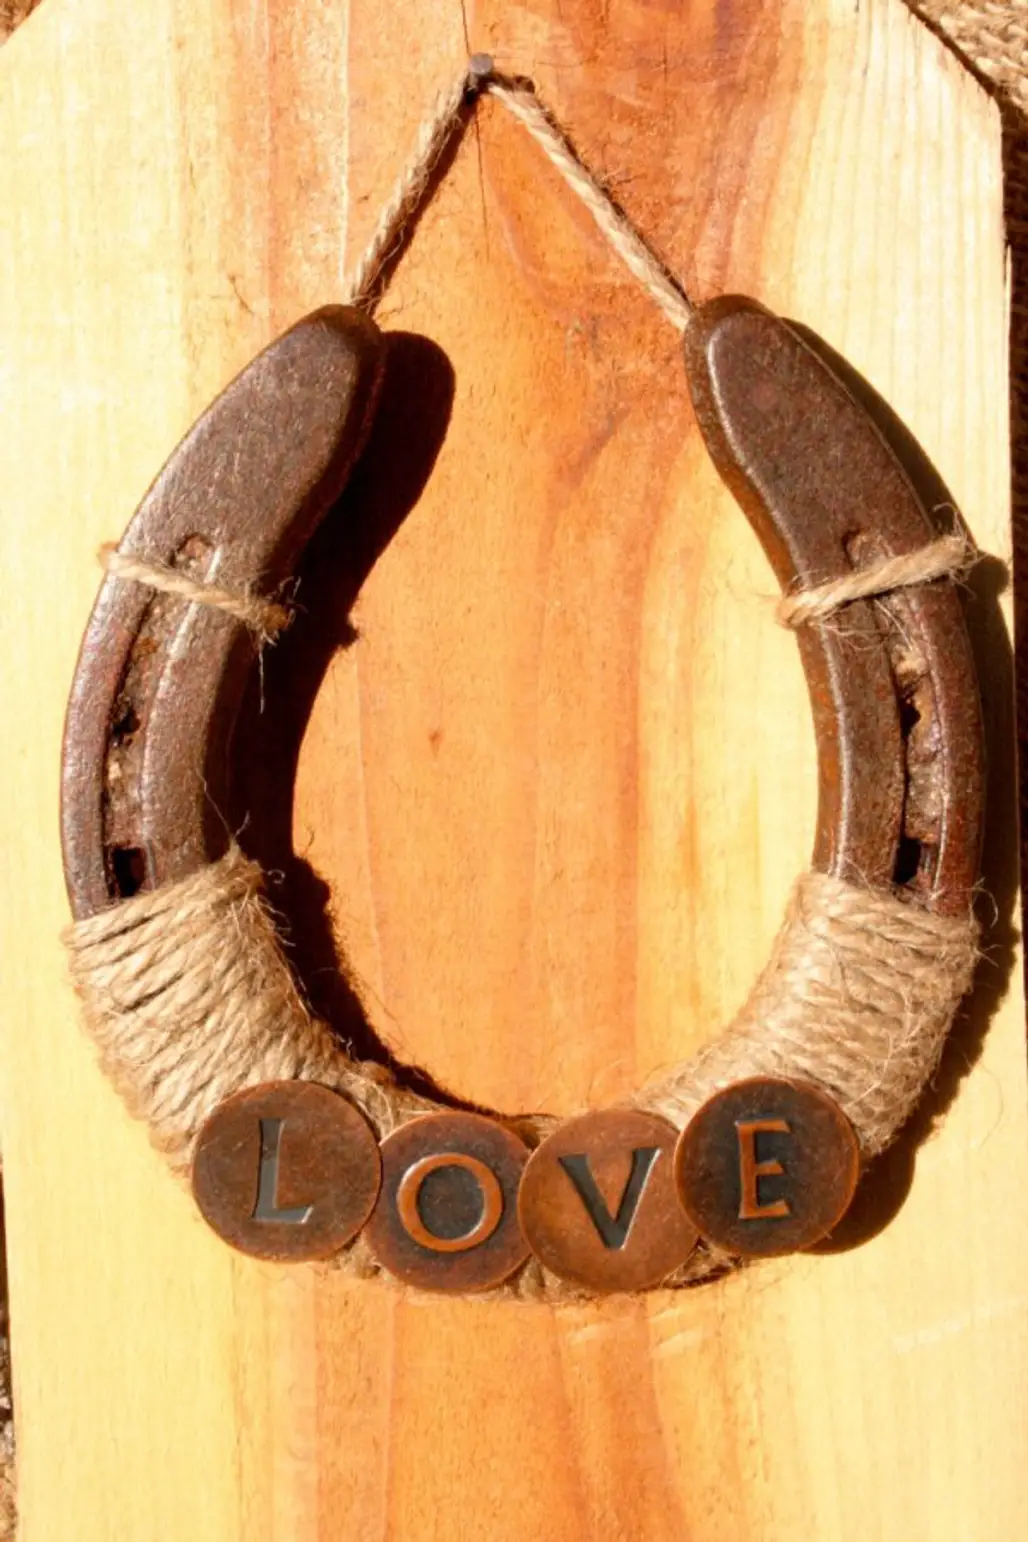 man made object,wood,horn,horseshoe,carving,